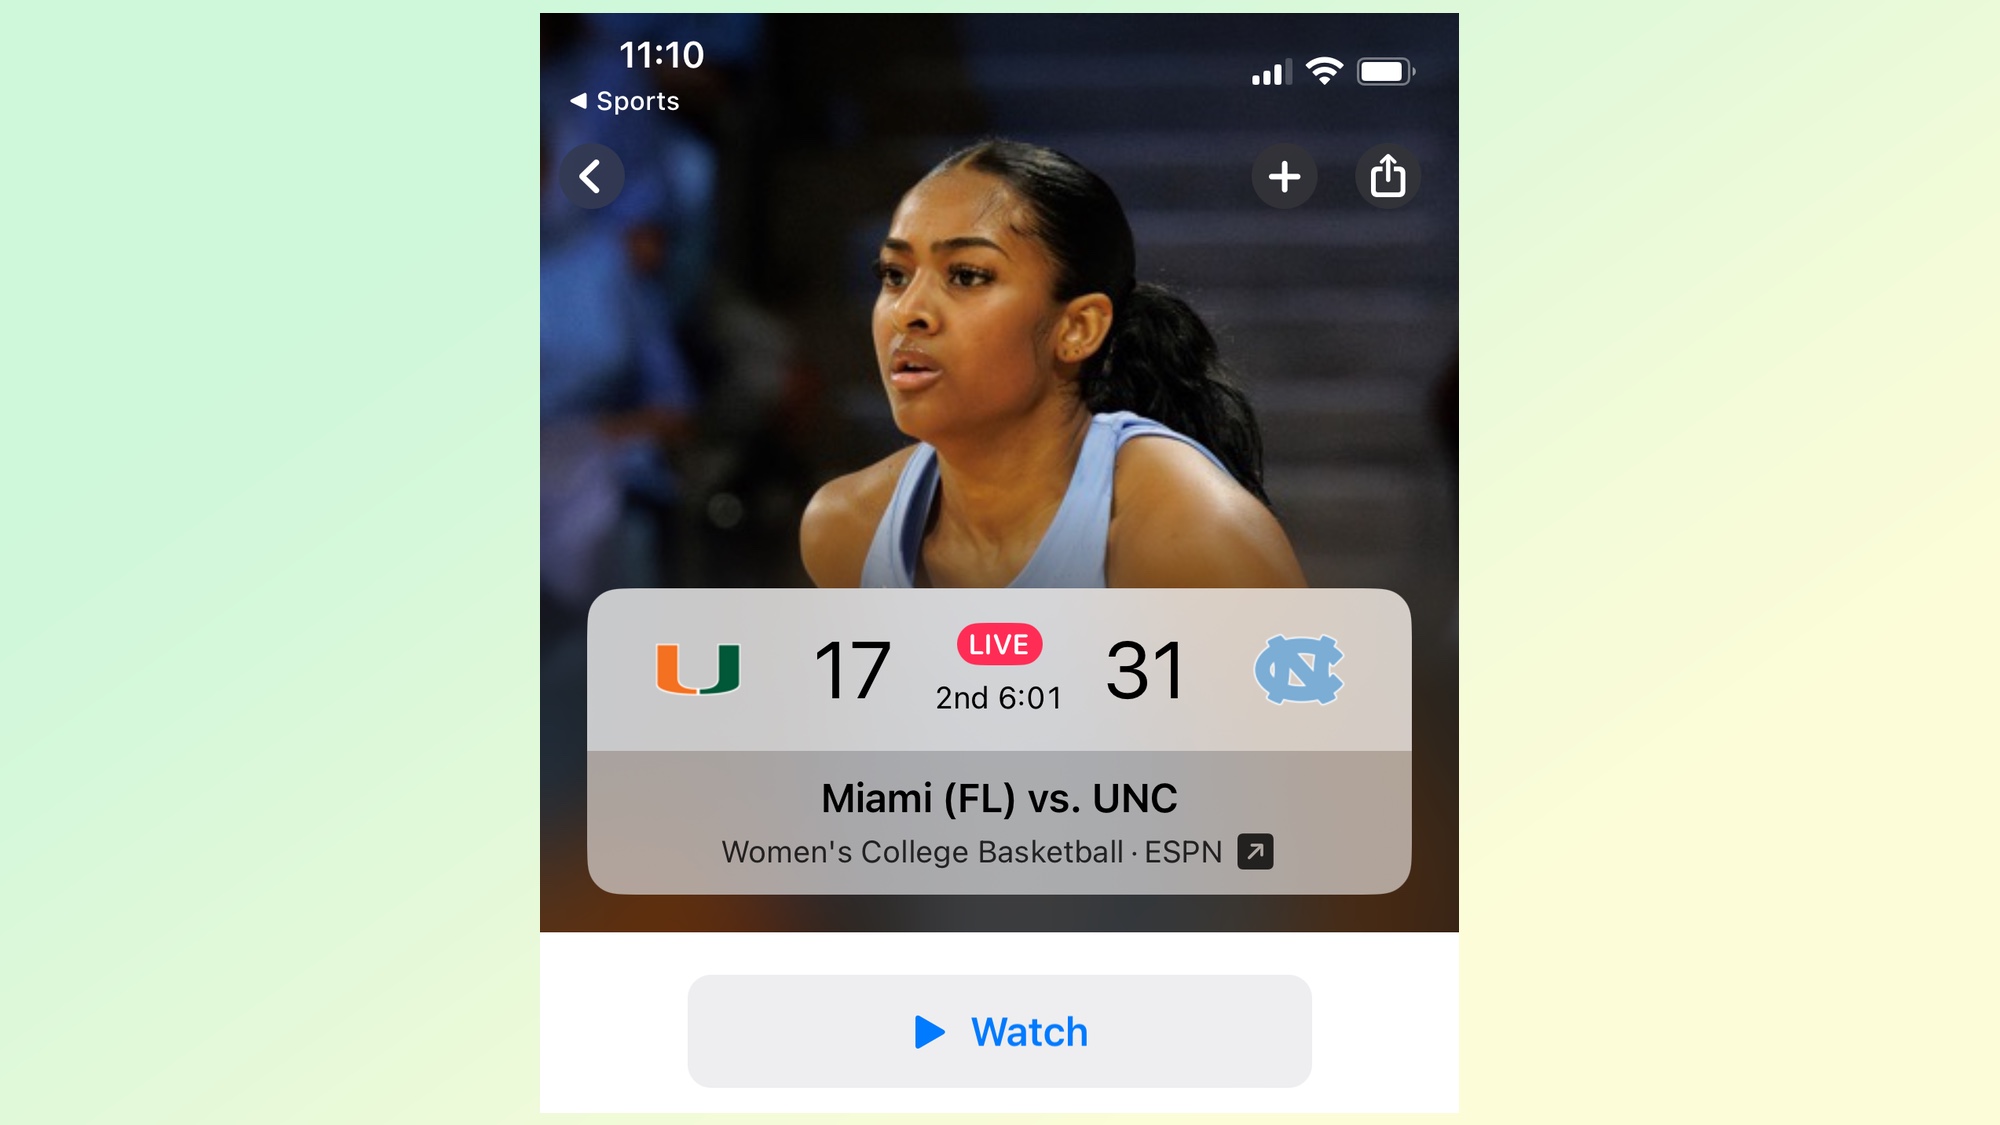 Apple Sports watch button takes you to Apple TV app